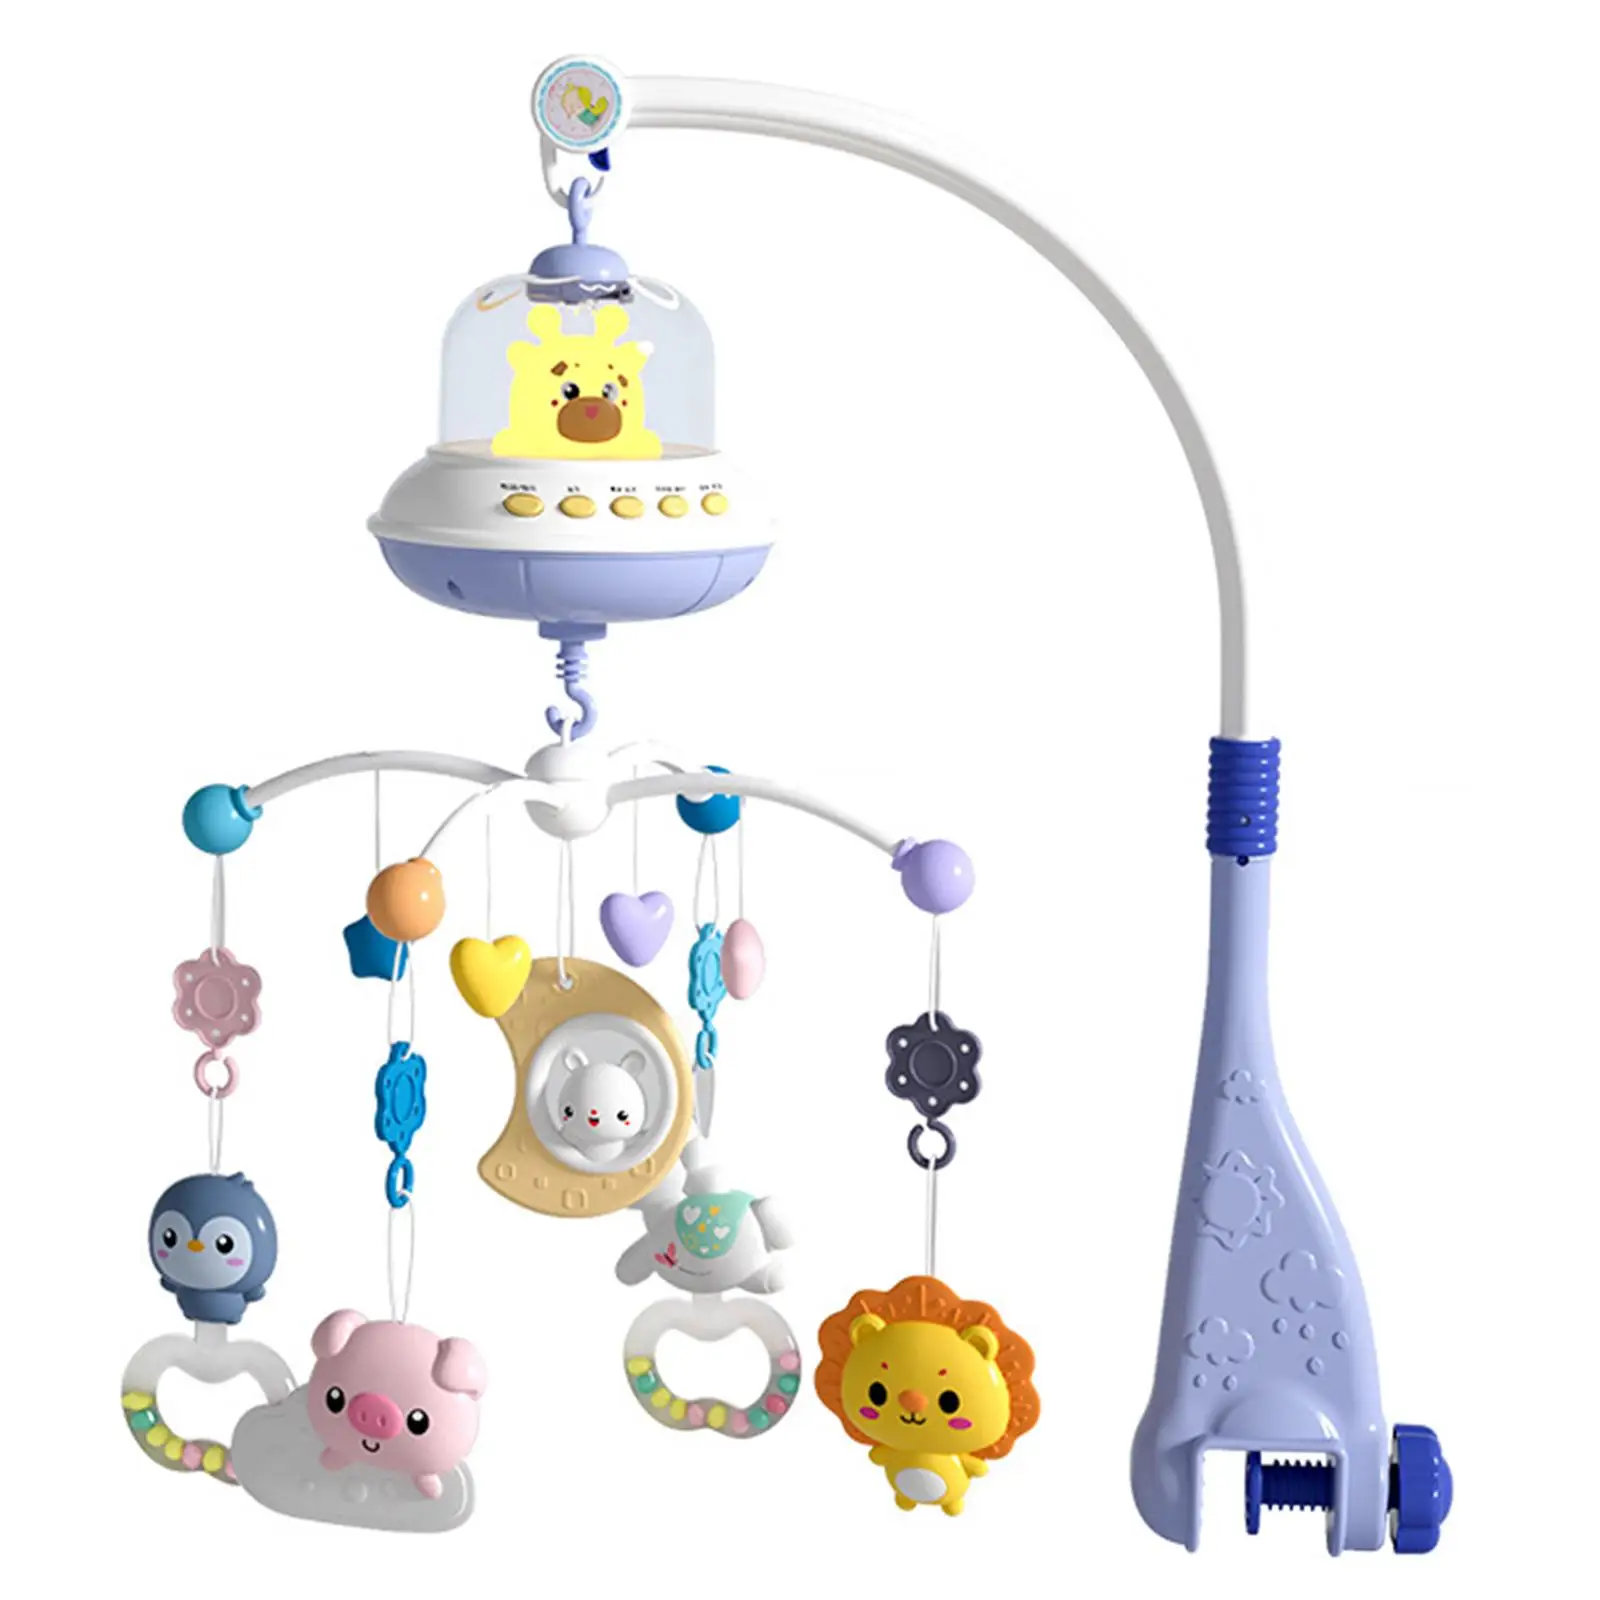 Baby Mobile Rattles Toys Colorful W/ Nightlight 0-12 Months Rattles Carousel for Birthday